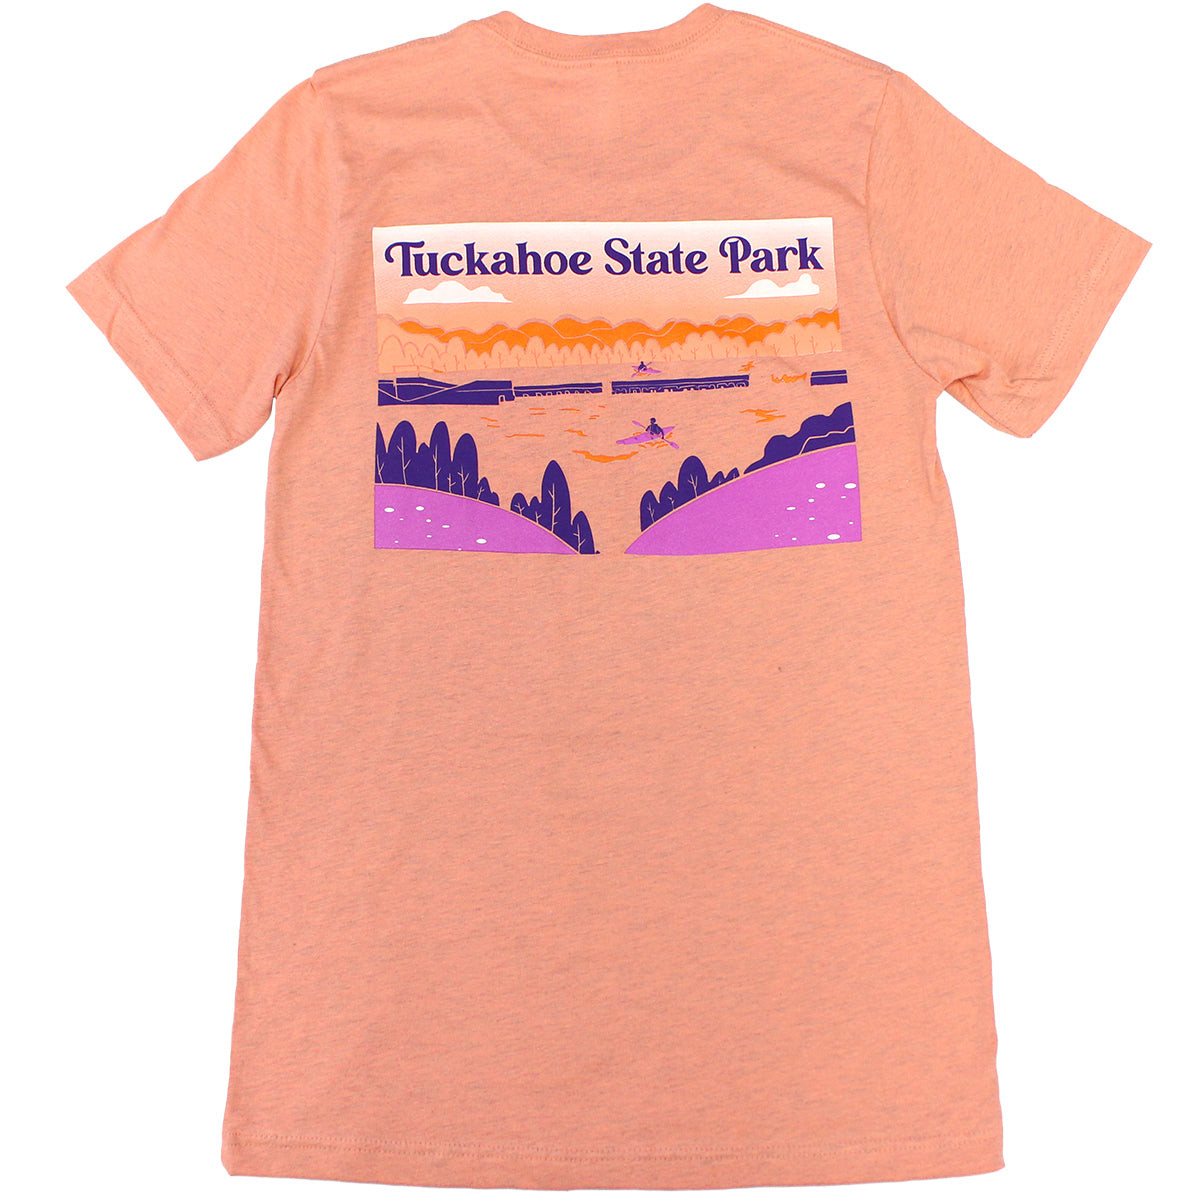 Tuckahoe State Park (Heather Sunset) / Shirt - Route One Apparel